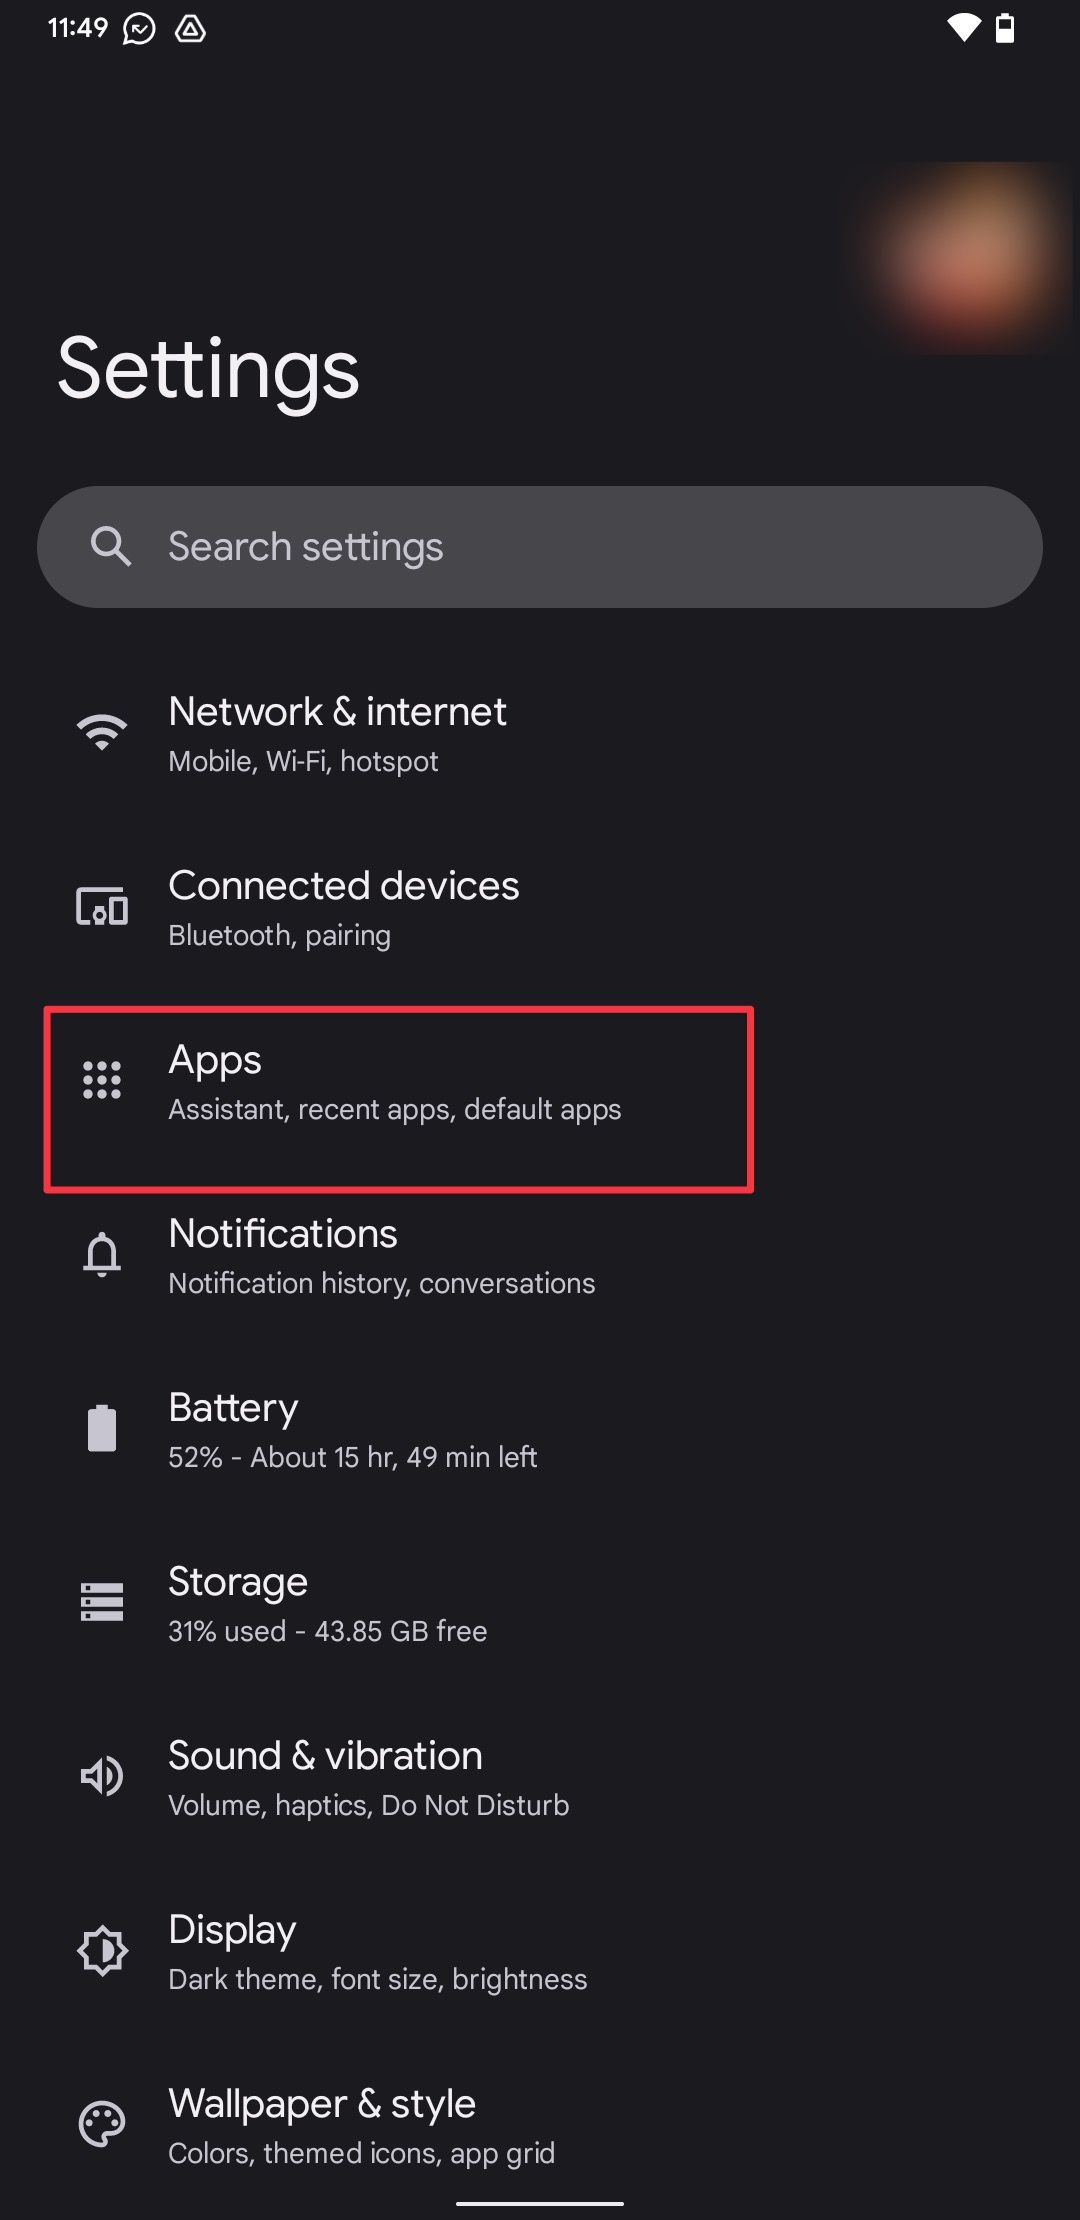 Android Settings page screenshot showing Apps option